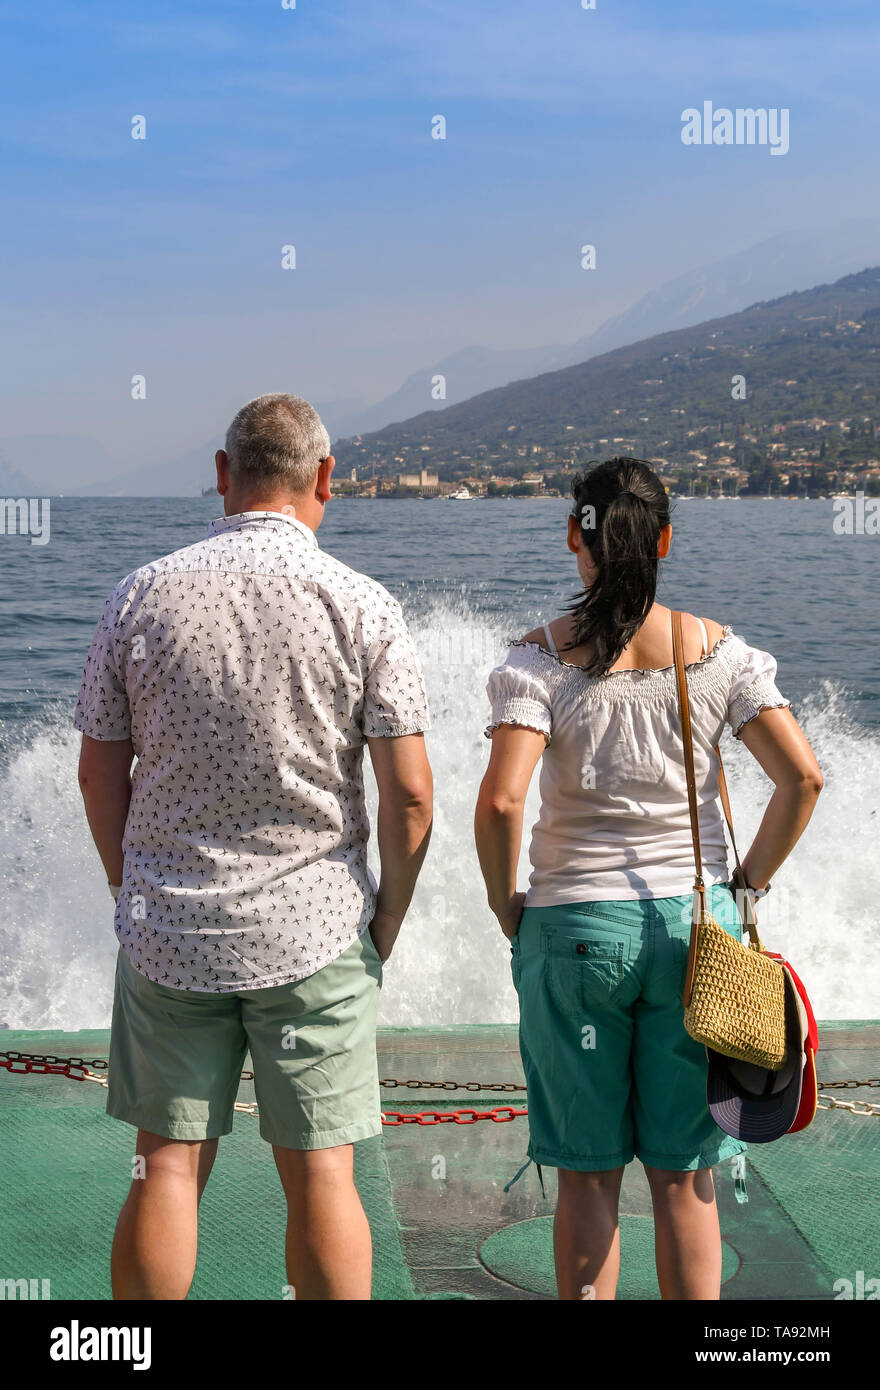 GARDA, LAKE GARDA, ITALY - SEPTEMBER 2018: Two people standing on the front of a  passenger ferry on a journey across Lake Garda with waves and spray. Stock Photo